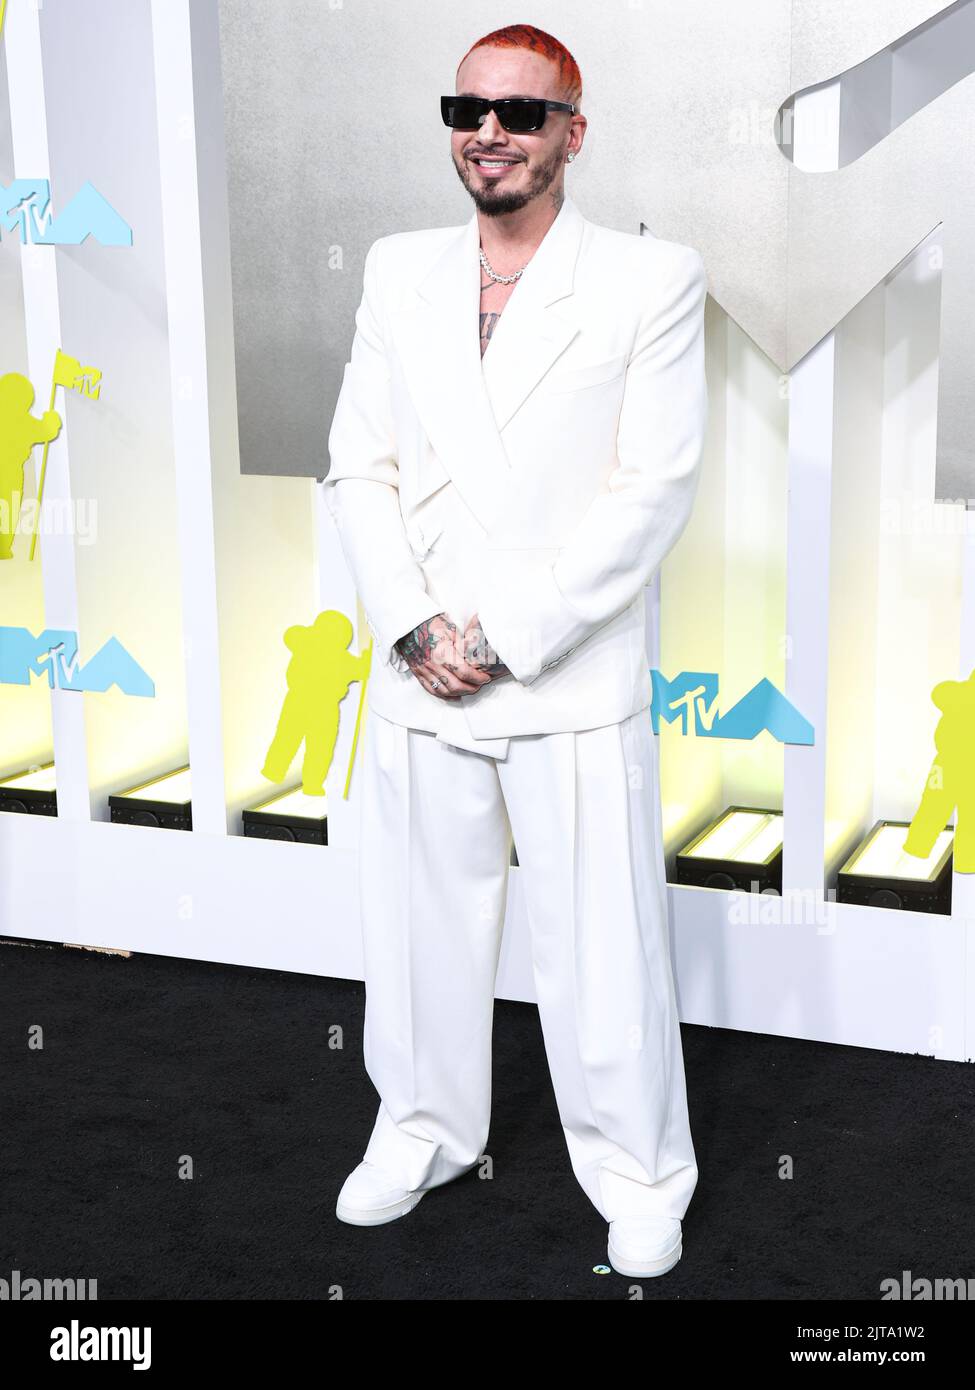 PHOTOS] Hottest Celebrity Pics This Week Of June 22-28: J Balvin